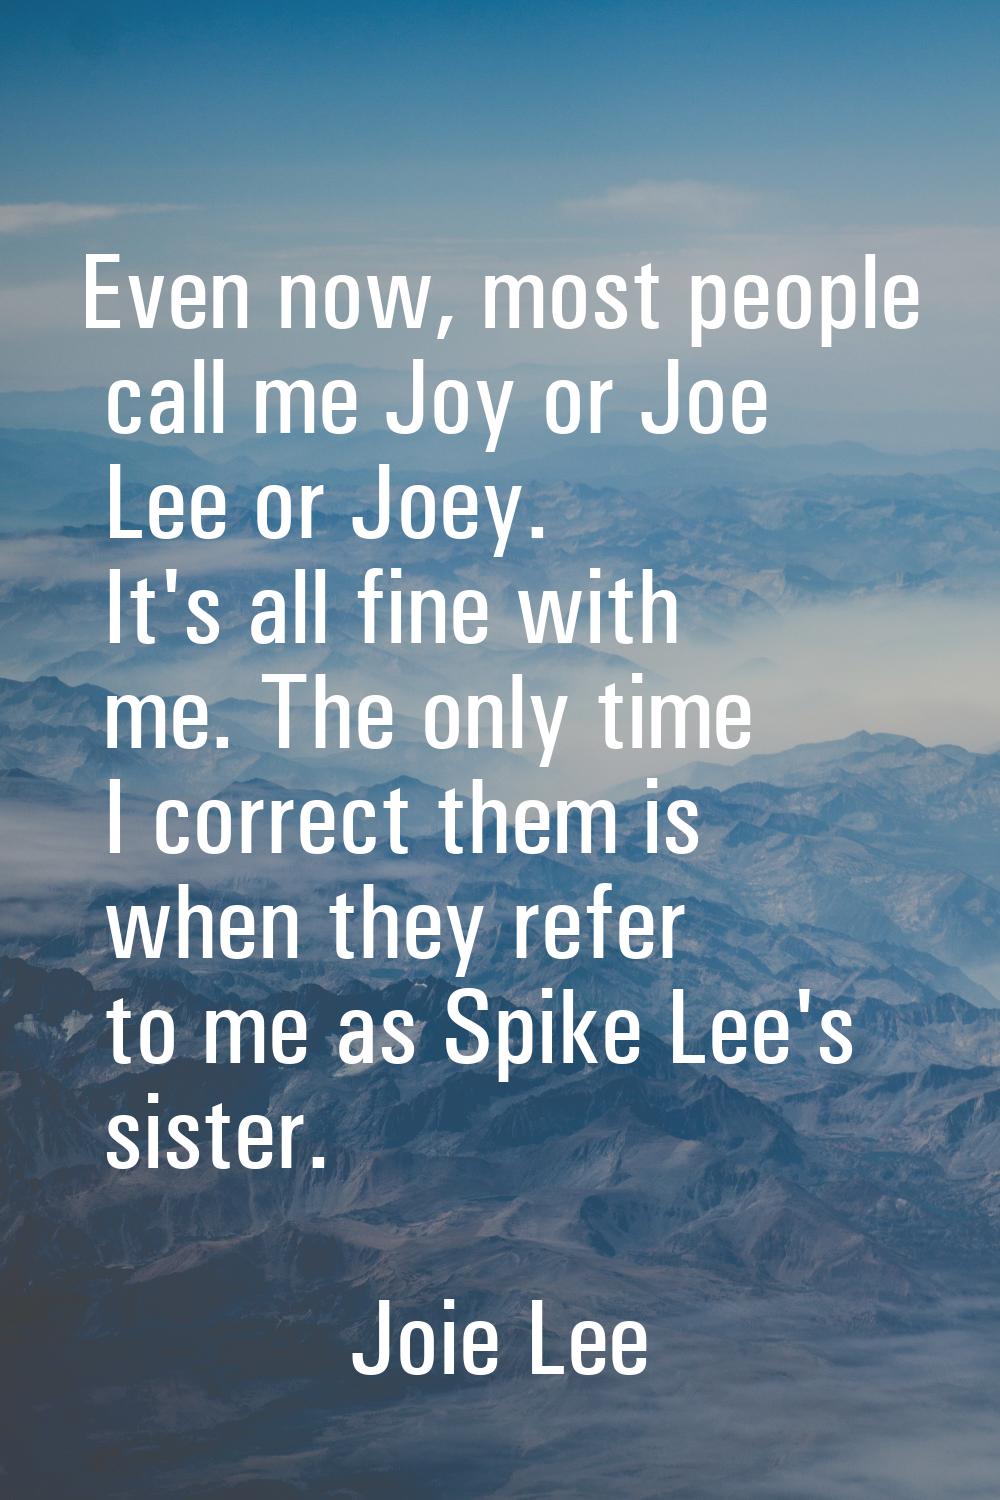 Even now, most people call me Joy or Joe Lee or Joey. It's all fine with me. The only time I correc